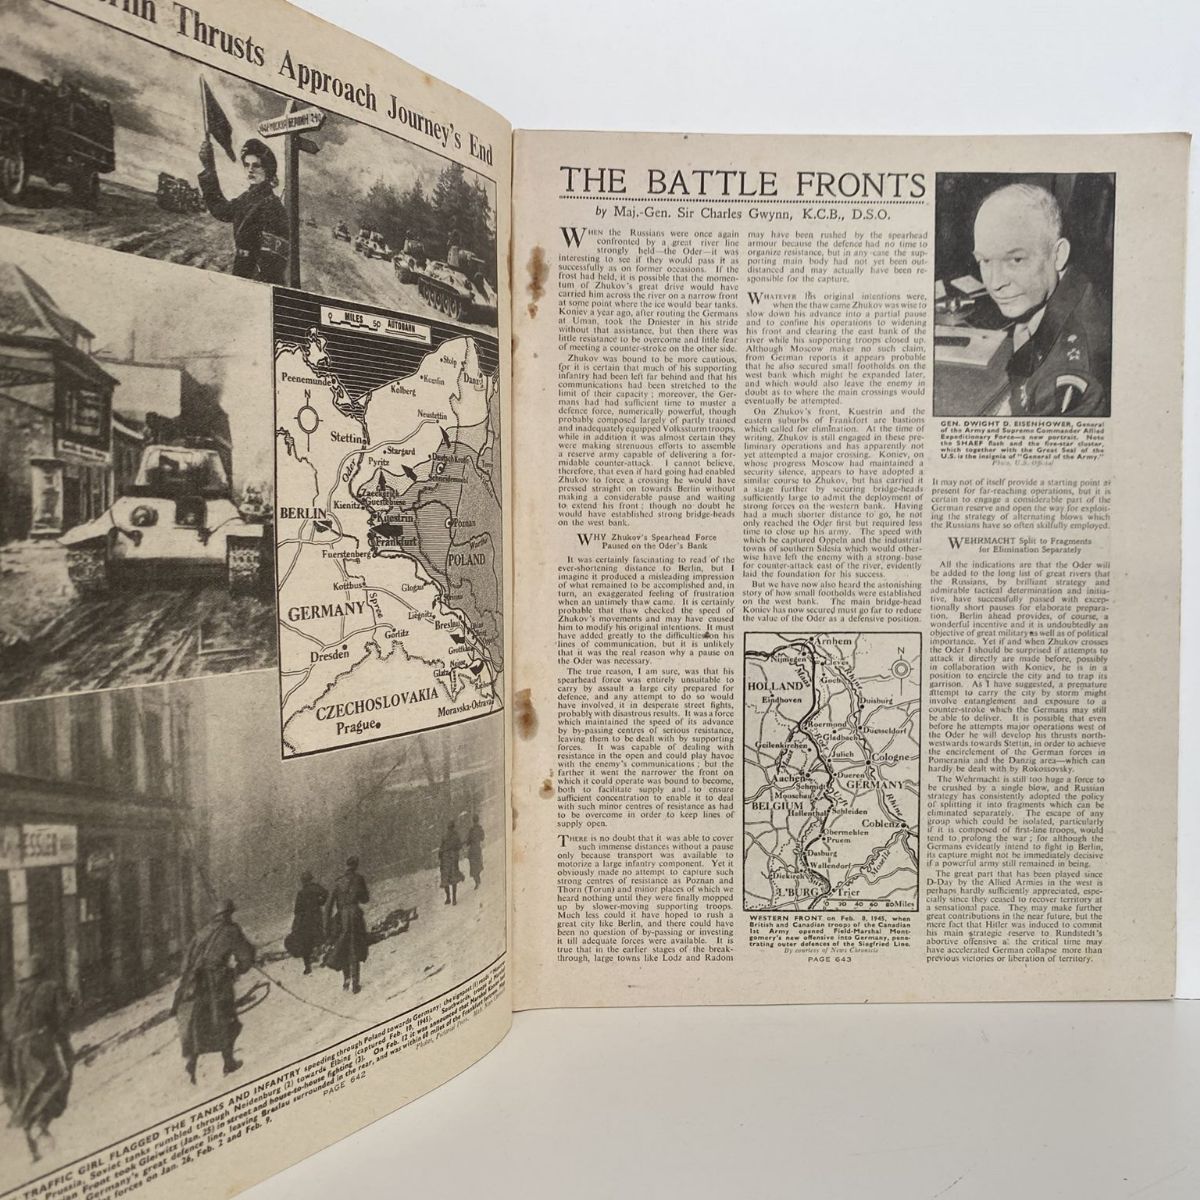 THE WAR ILLUSTRATED - Vol 8, No 201, 2nd March 1945